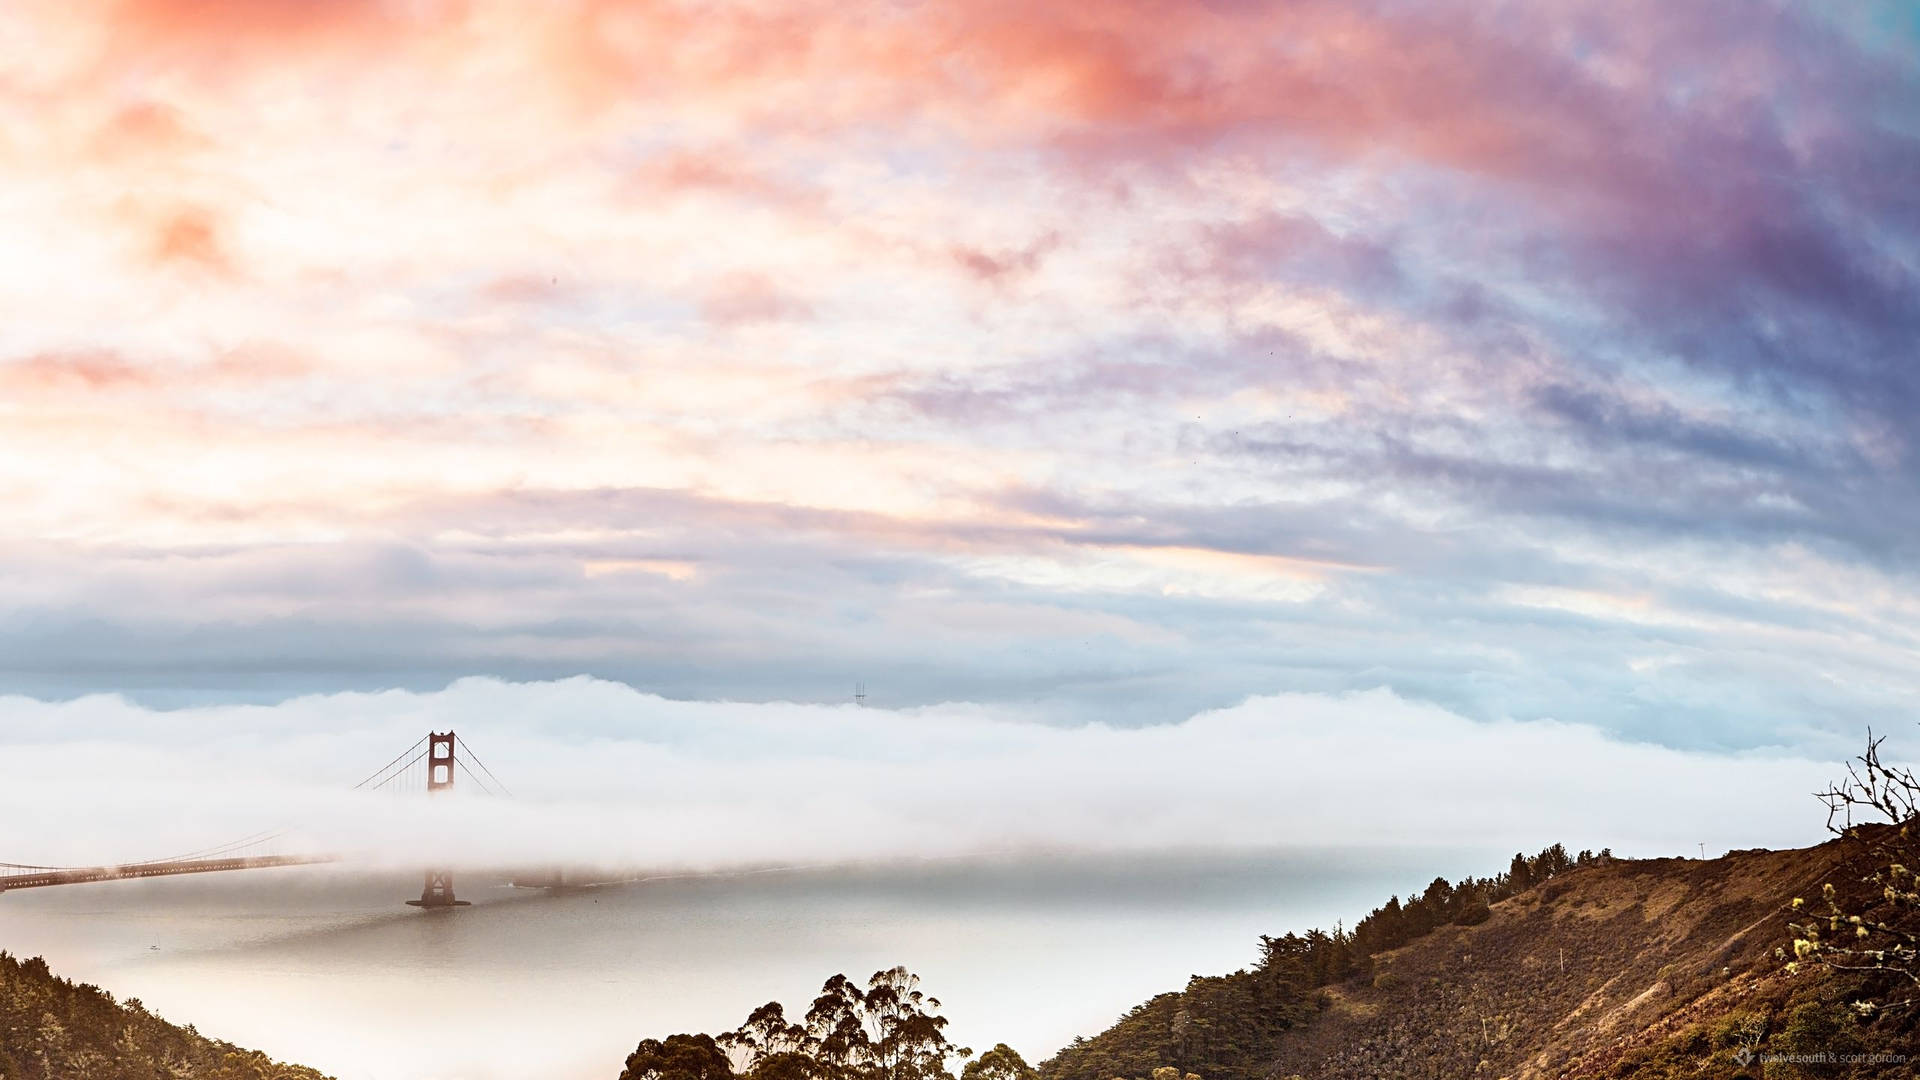 San Francisco’s Golden Gate Bridge lit up at night – a perfect accompaniment to your new Macbook. Wallpaper